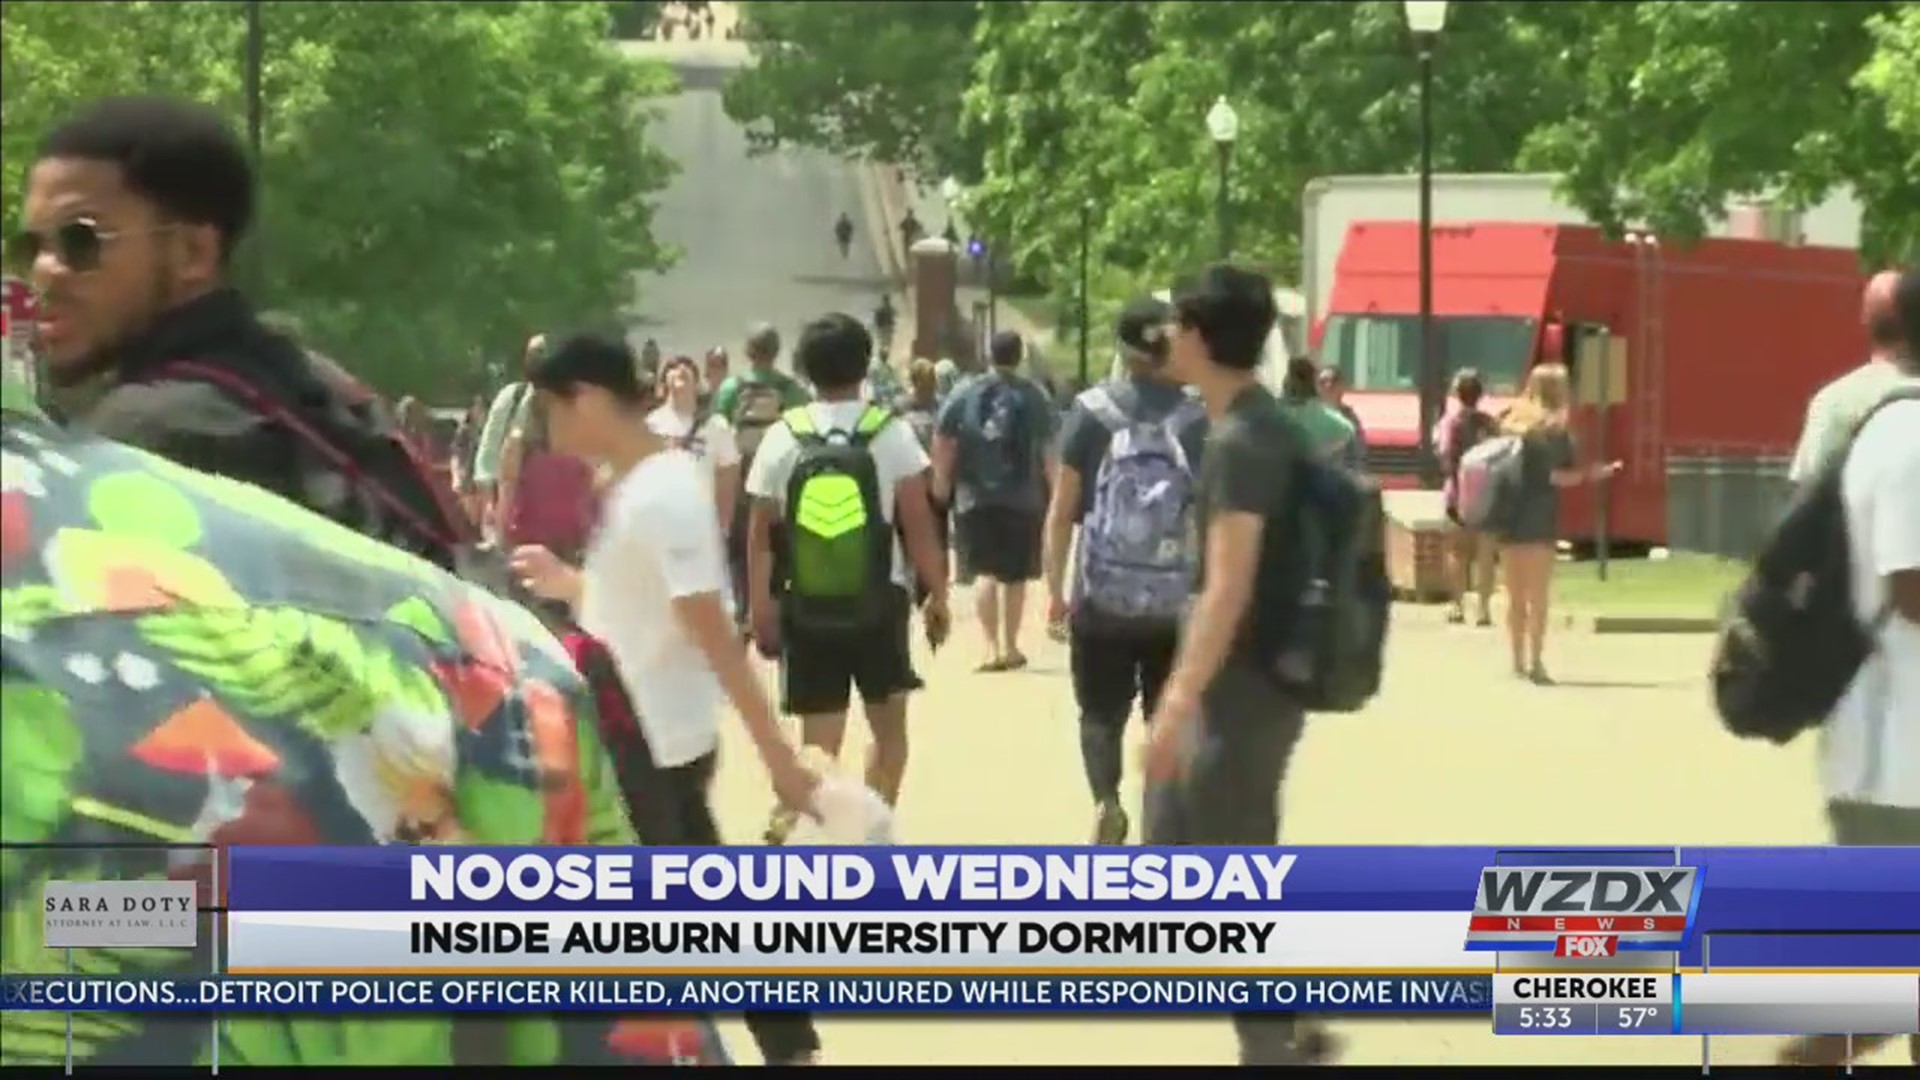 Auburn University says it’s investigating after an extension cord tied into a noose was found inside a campus residence hall.